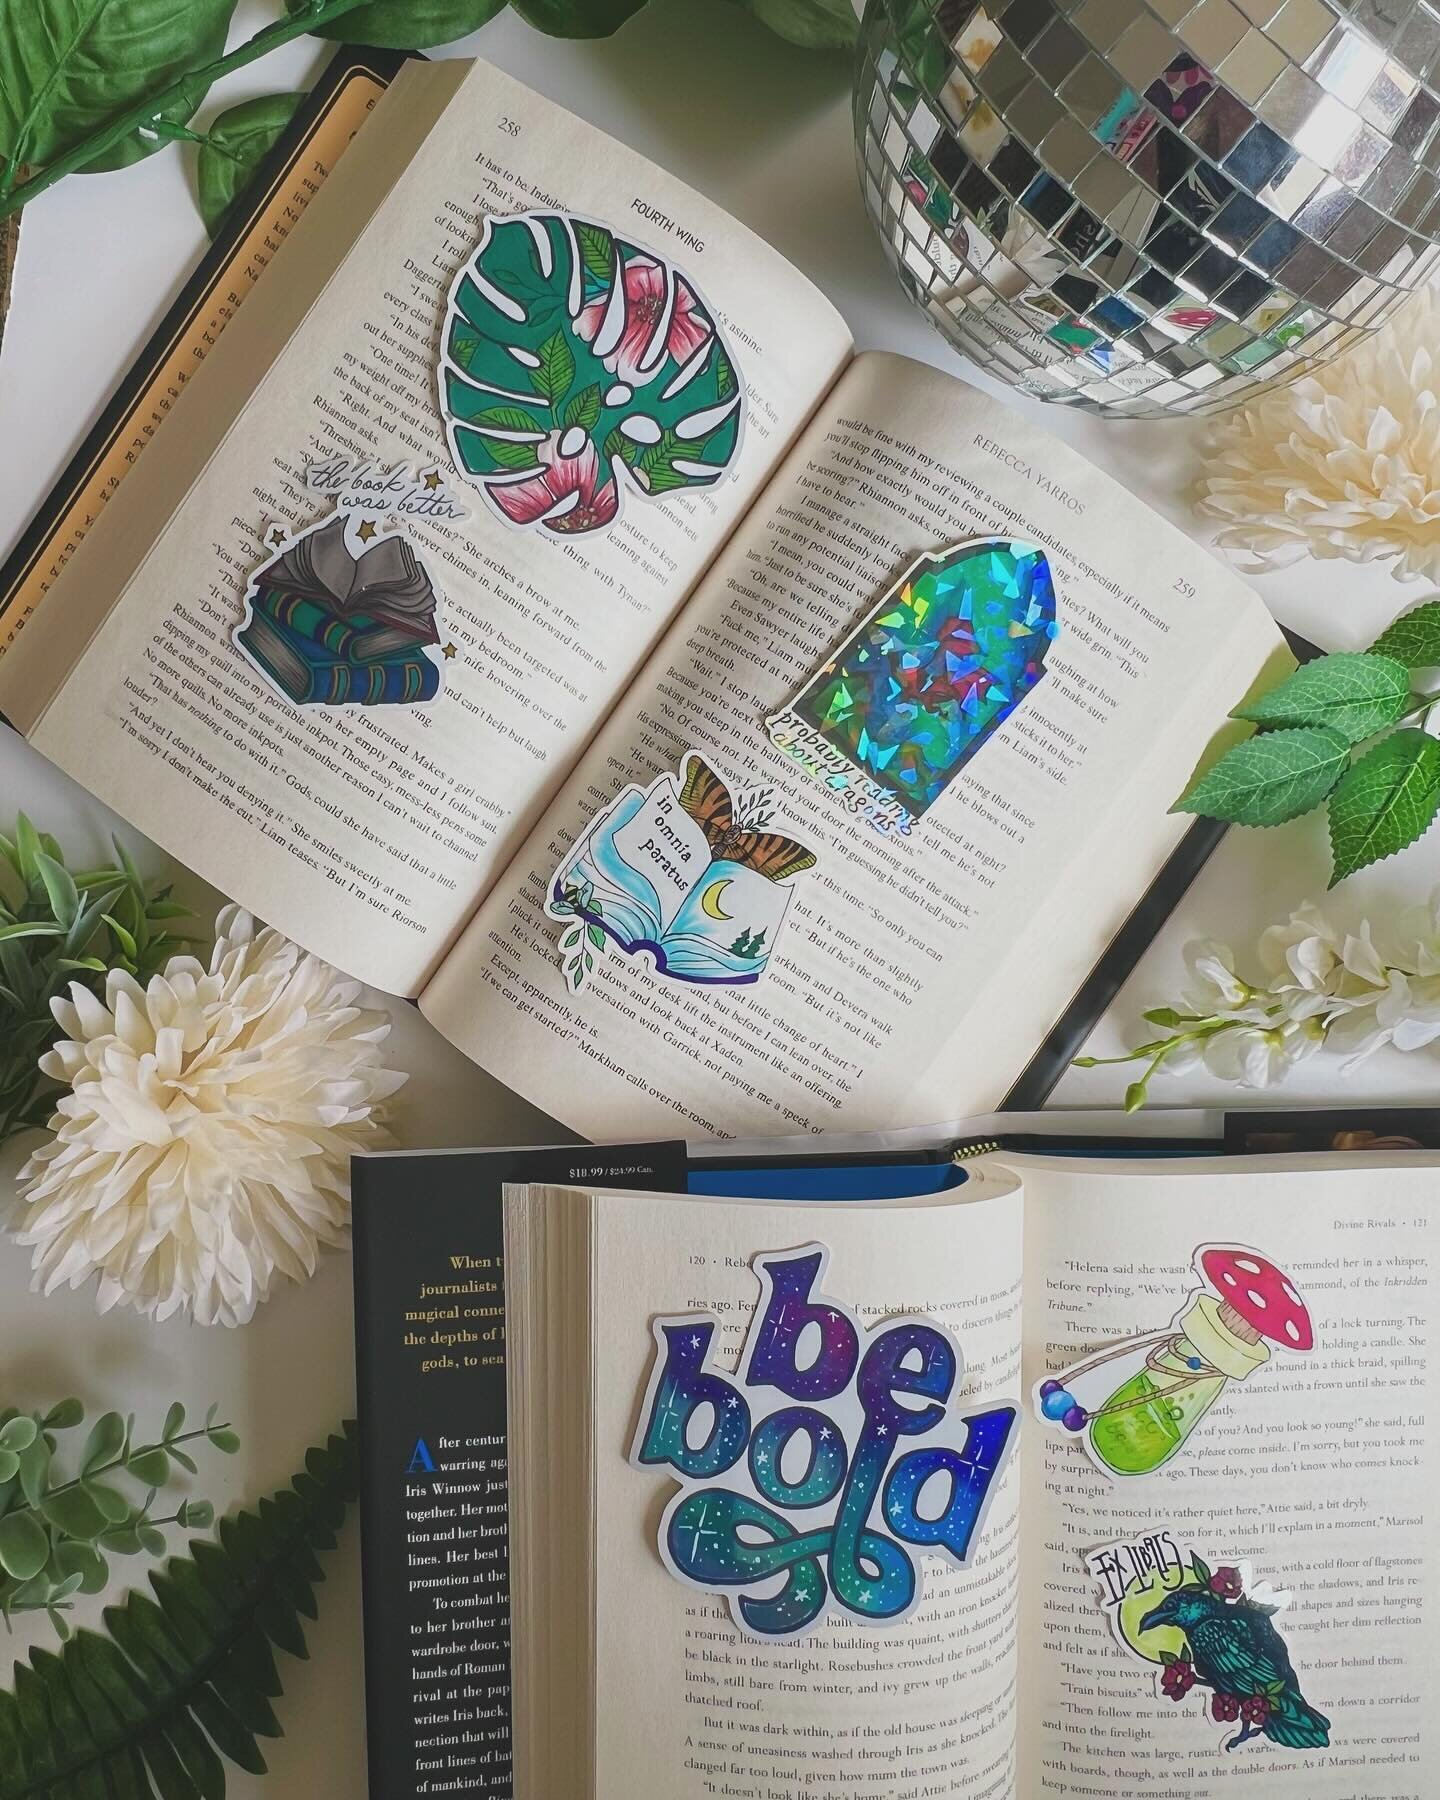 Enjoy some pictures I took of @inkwildflower BEAUTIFUL stickers! 🌻🌸🌺🌷

My favorite is the one that has a Gilmore Girls reference (can you spot it? 👀) I highly recommend you check out her store! She has some really great stuff on there. 

#bookis